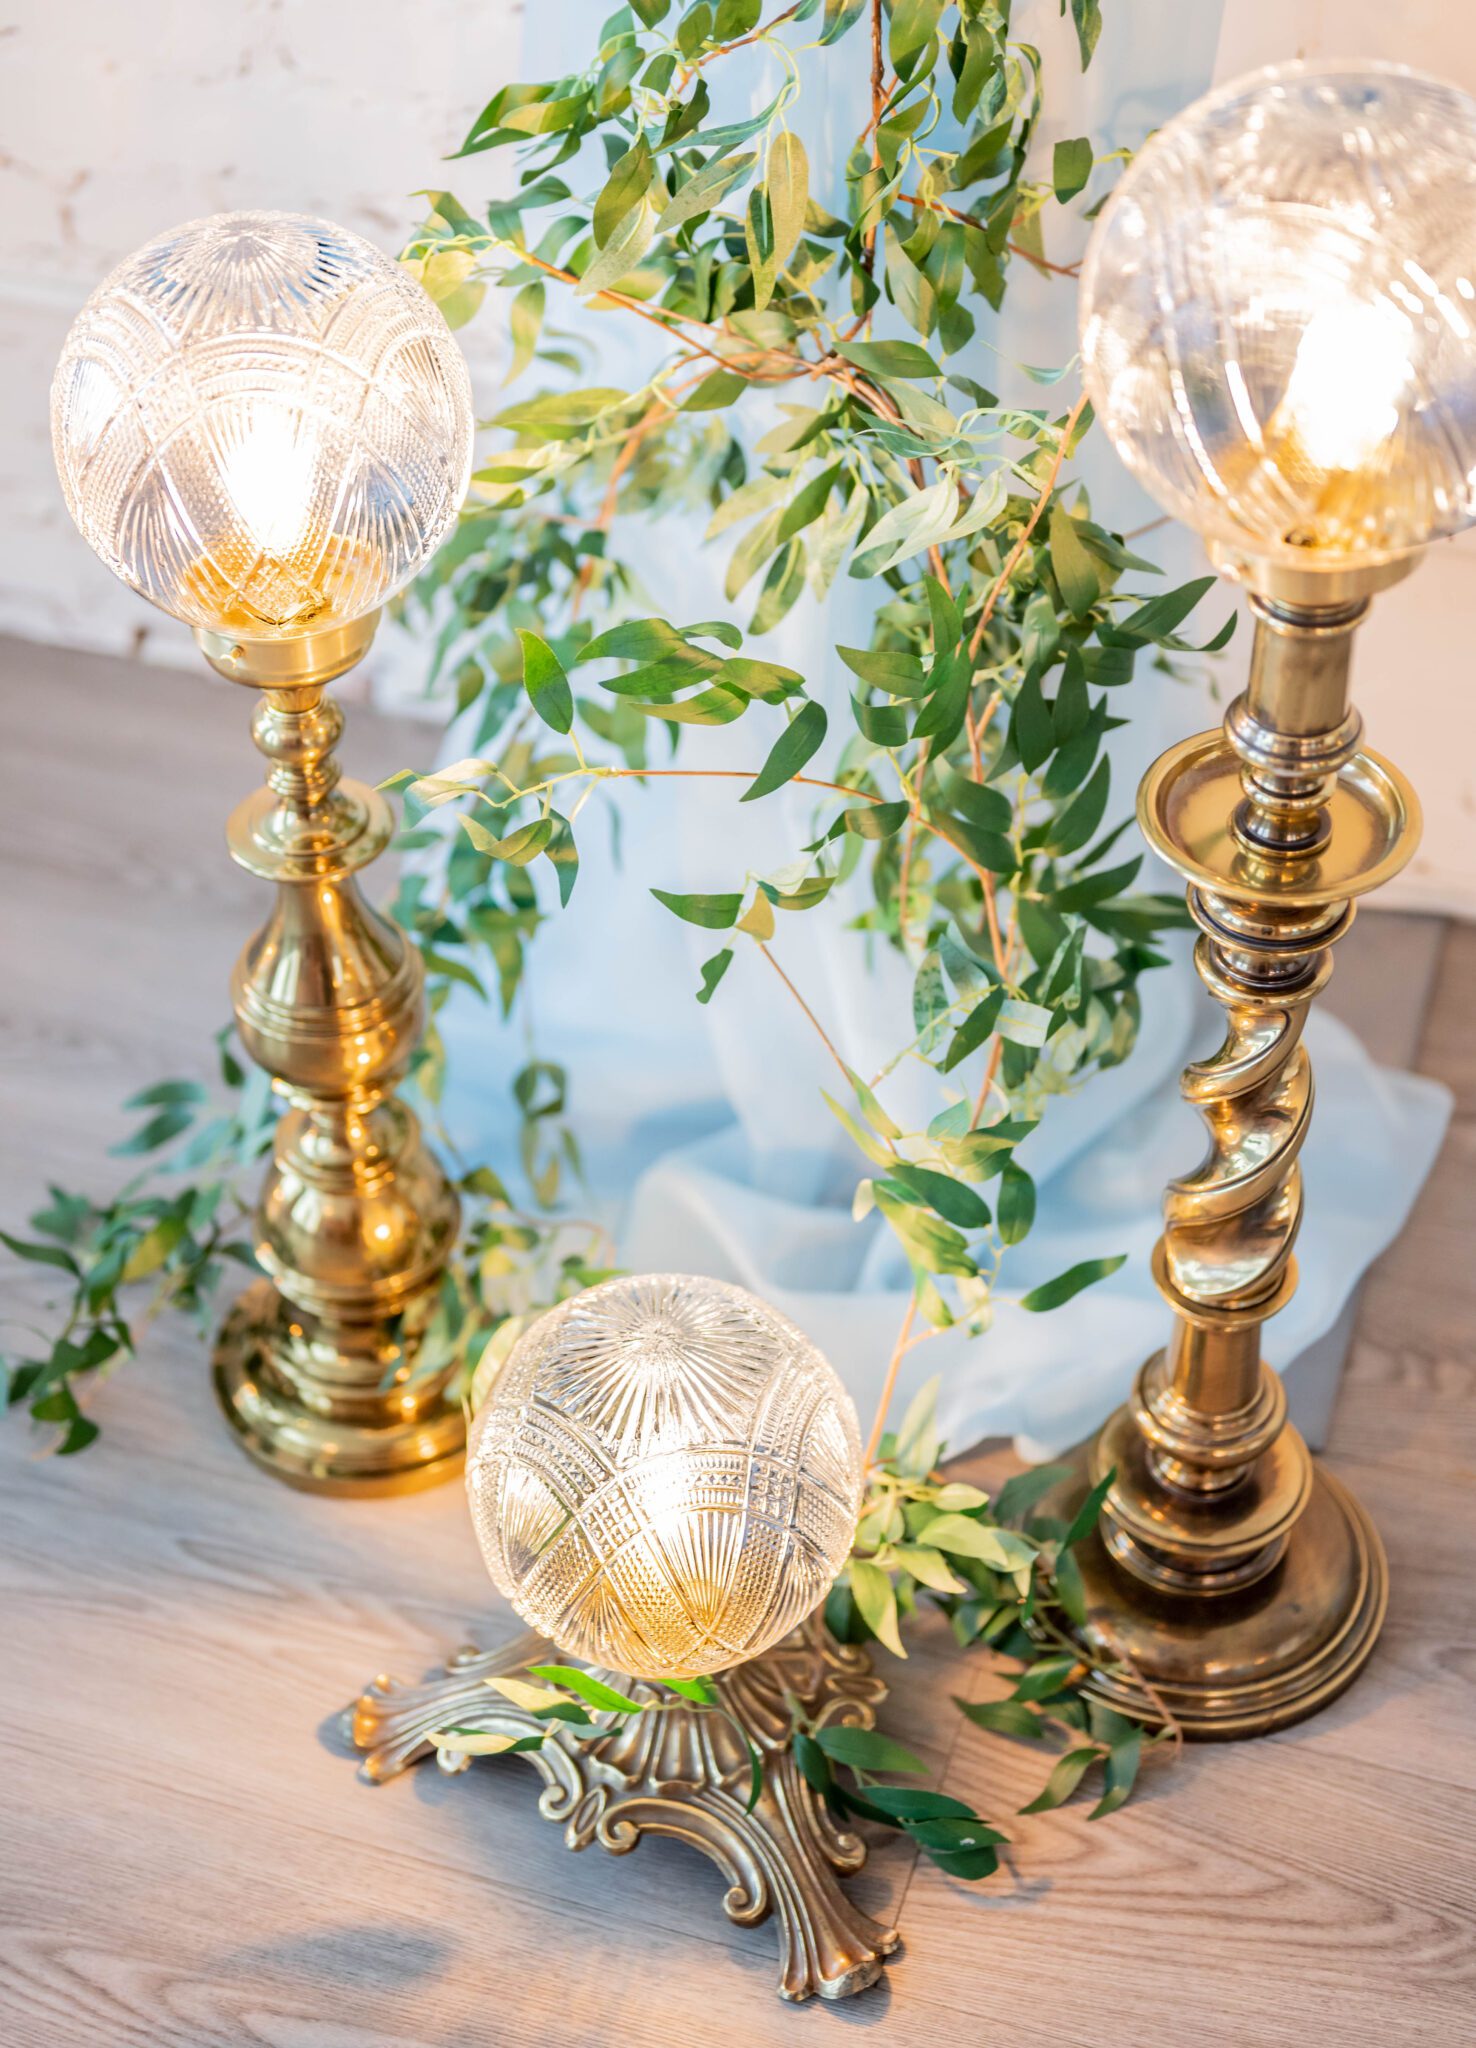 Nostalgic ambiance with vintage brass lighting decor by Coven Creative for indoor ceremony, french inspired wedding decor with baby blue accents, inspiring delicate greenery for ceremony decor 